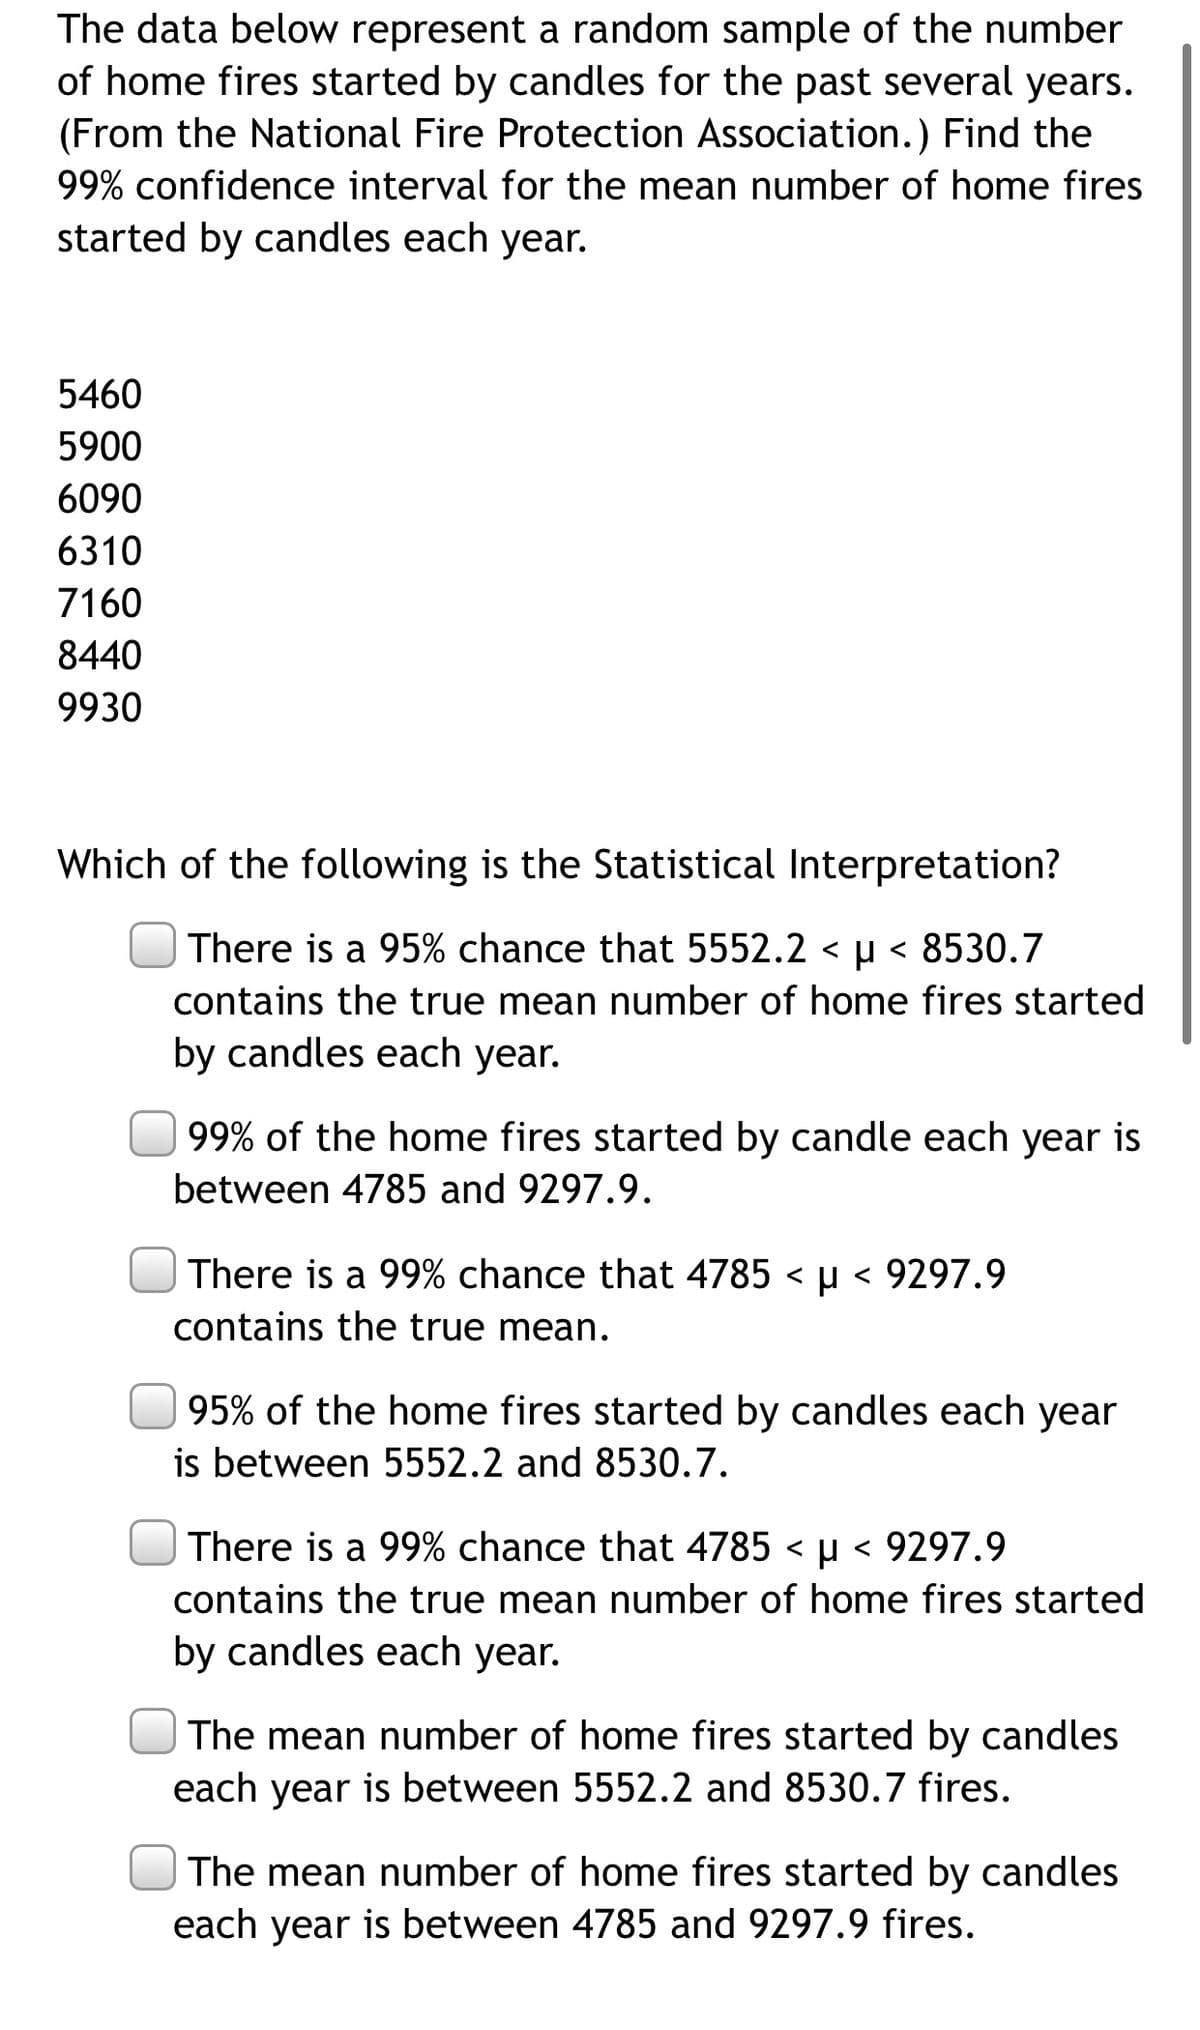 The data below represent a random sample of the number
of home fires started by candles for the past several years.
(From the National Fire Protection Association.) Find the
99% confidence interval for the mean number of home fires
started by candles each year.
5460
5900
6090
6310
7160
8440
9930
Which of the following is the Statistical Interpretation?
There is a 95% chance that 5552.2 < µ < 8530.7
contains the true mean number of home fires started
by candles each year.
99% of the home fires started by candle each year is
between 4785 and 9297.9.
There is a 99% chance that 4785 < µ < 9297.9
contains the true mean.
95% of the home fires started by candles each year
is between 5552.2 and 8530.7.
There is a 99% chance that 4785 < µ < 9297.9
contains the true mean number of home fires started
by candles each year.
The mean number of home fires started by candles
each year is between 5552.2 and 8530.7 fires.
The mean number of home fires started by candles
each year is between 4785 and 9297.9 fires.
